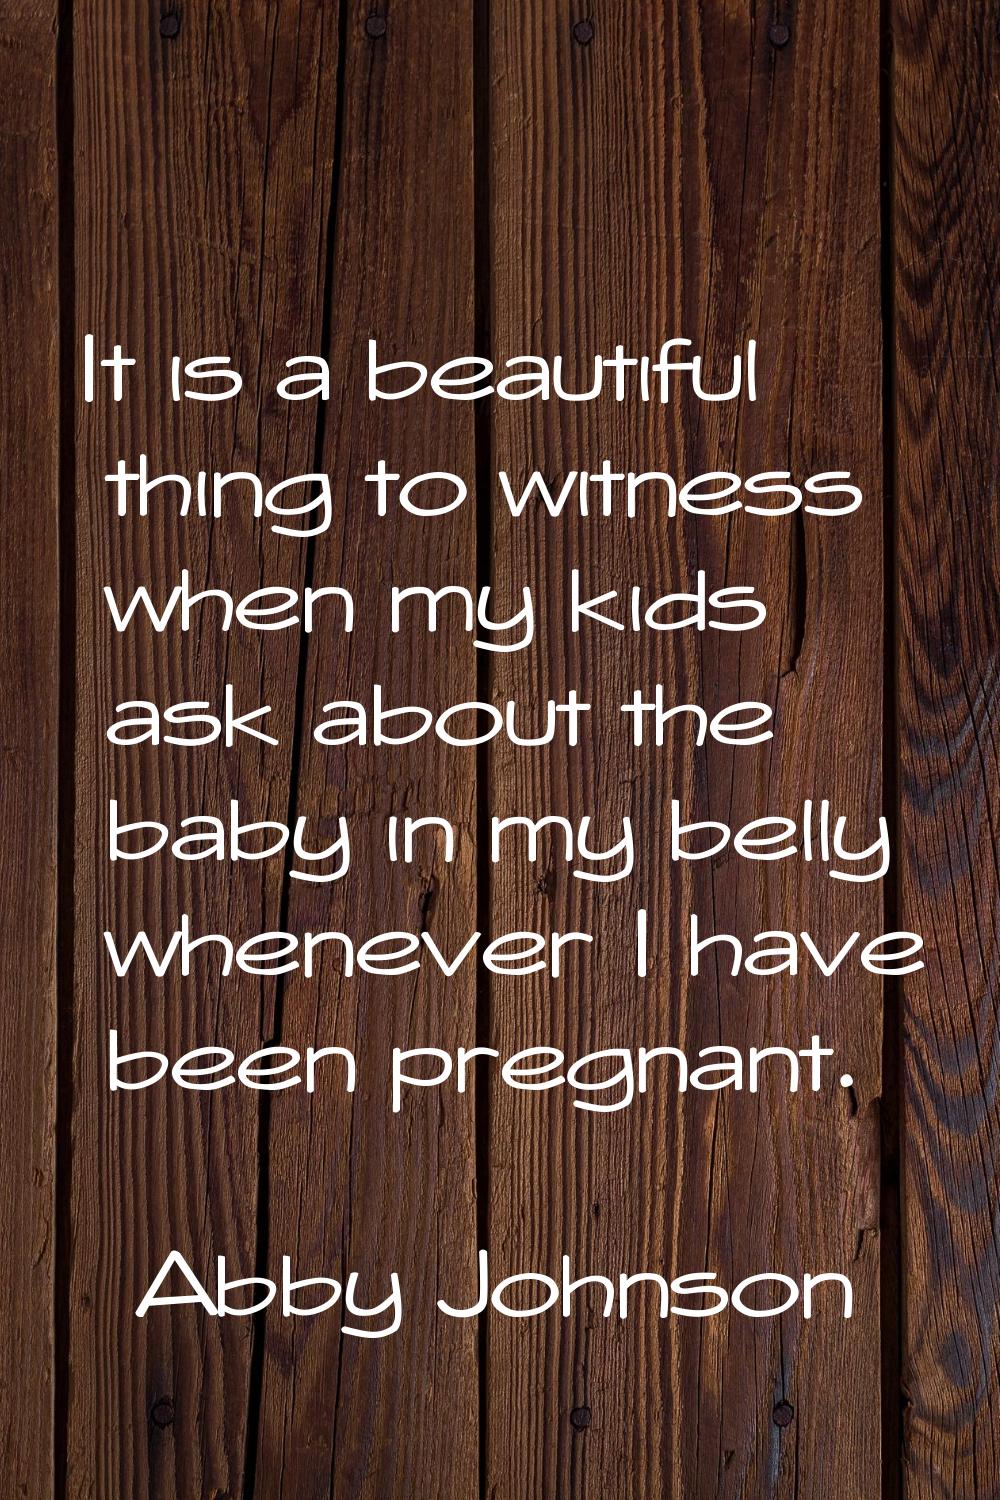 It is a beautiful thing to witness when my kids ask about the baby in my belly whenever I have been